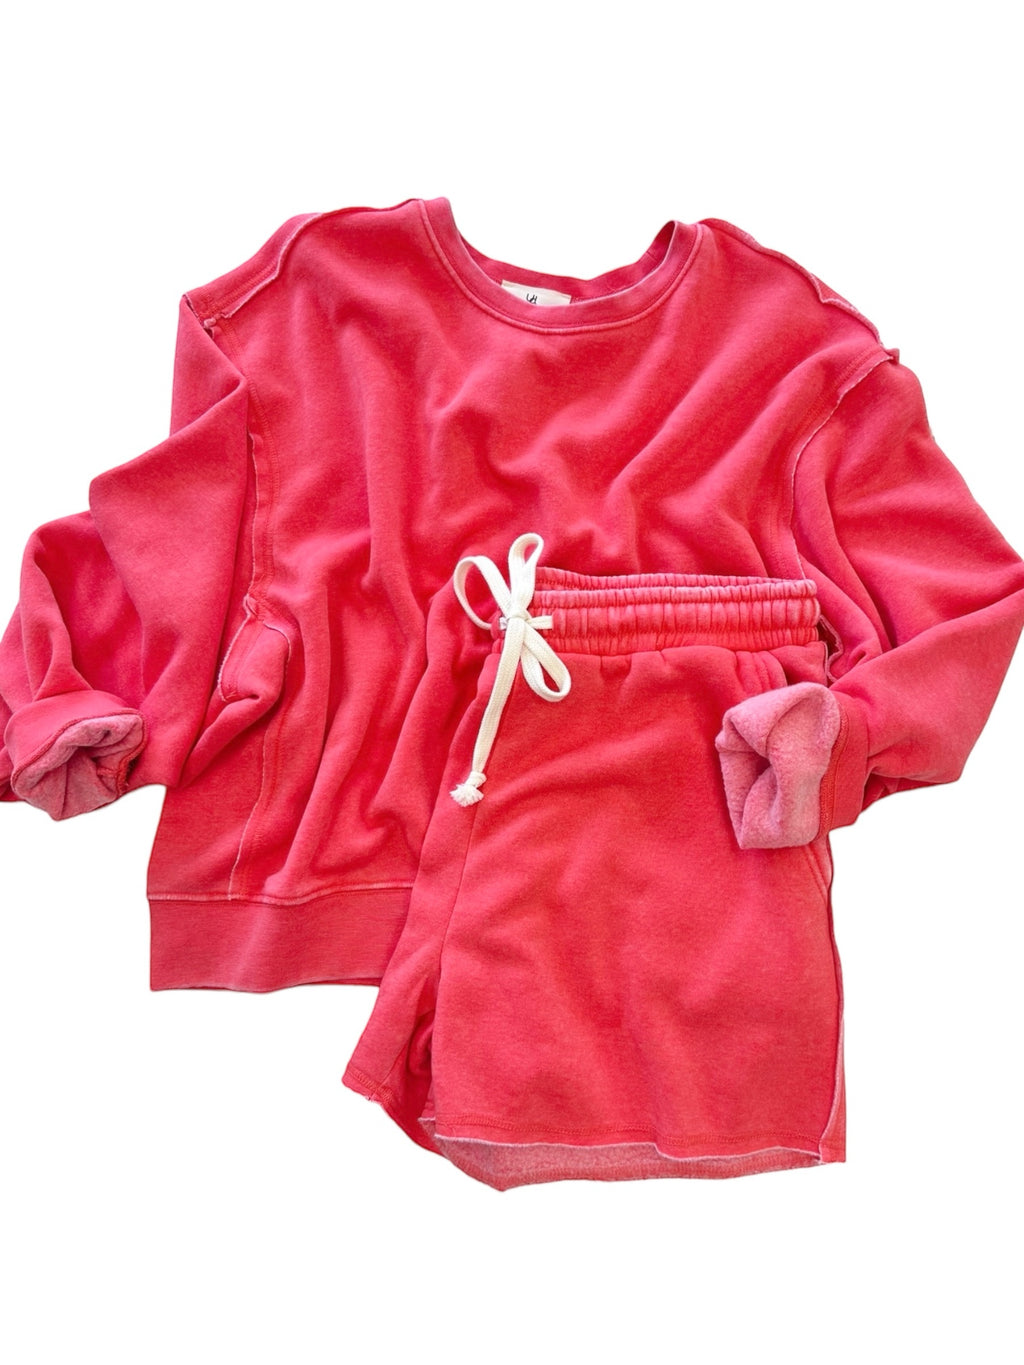 Watermelon Red Molly Sweatshirt and Short Set with a crew neckline, ribbed cuffs, elastic waistline and frayed hem perfect for stylish and comfortable lounging.